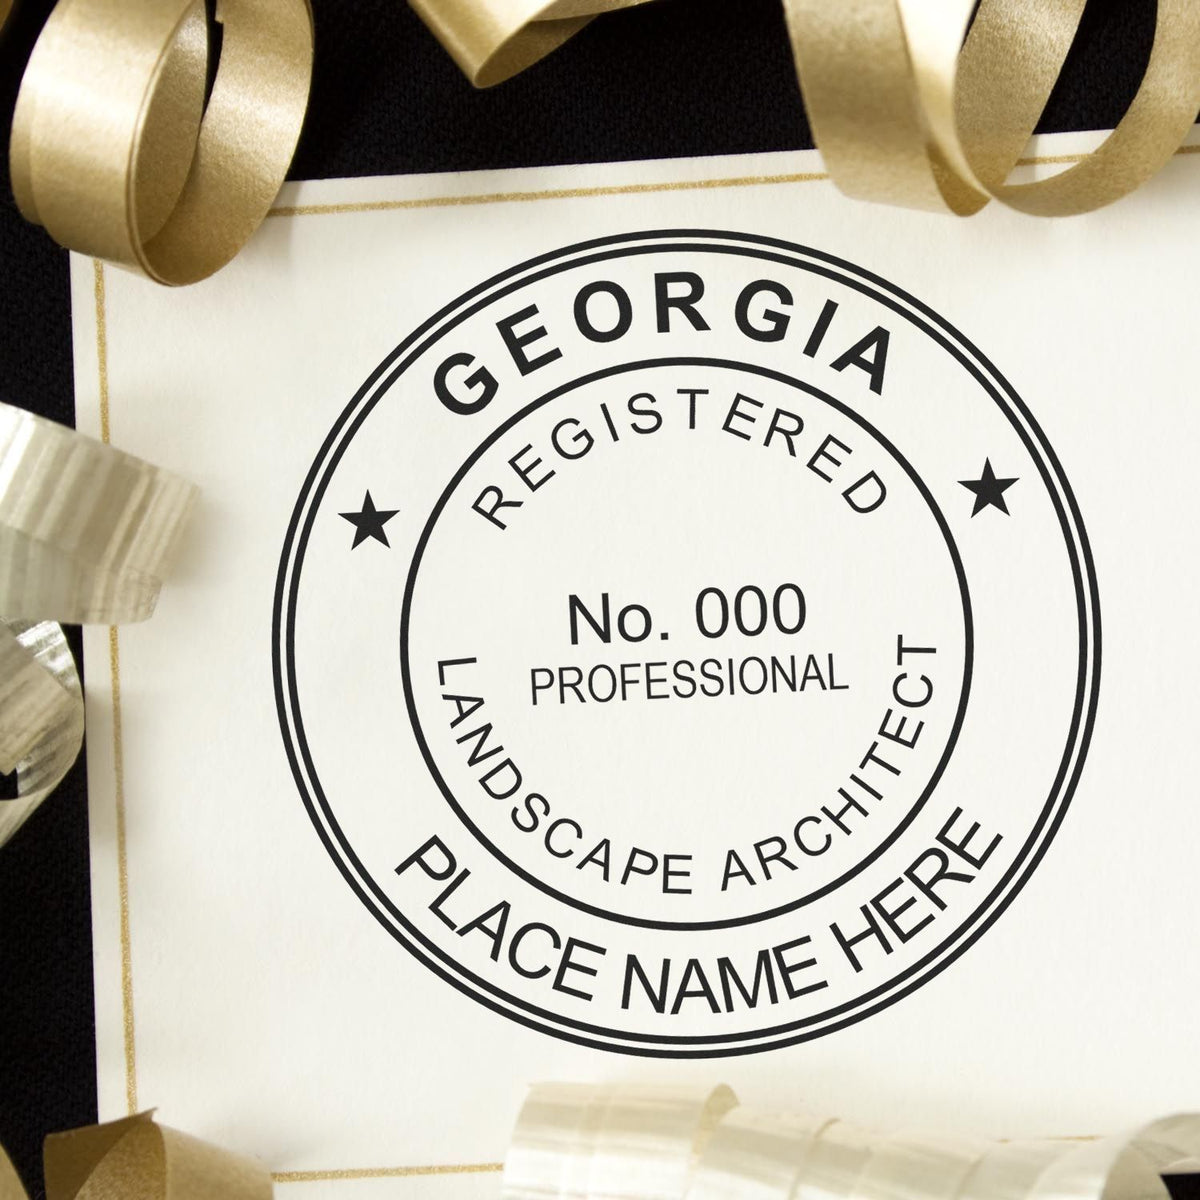 This paper is stamped with a sample imprint of the Premium MaxLight Pre-Inked Georgia Landscape Architectural Stamp, signifying its quality and reliability.